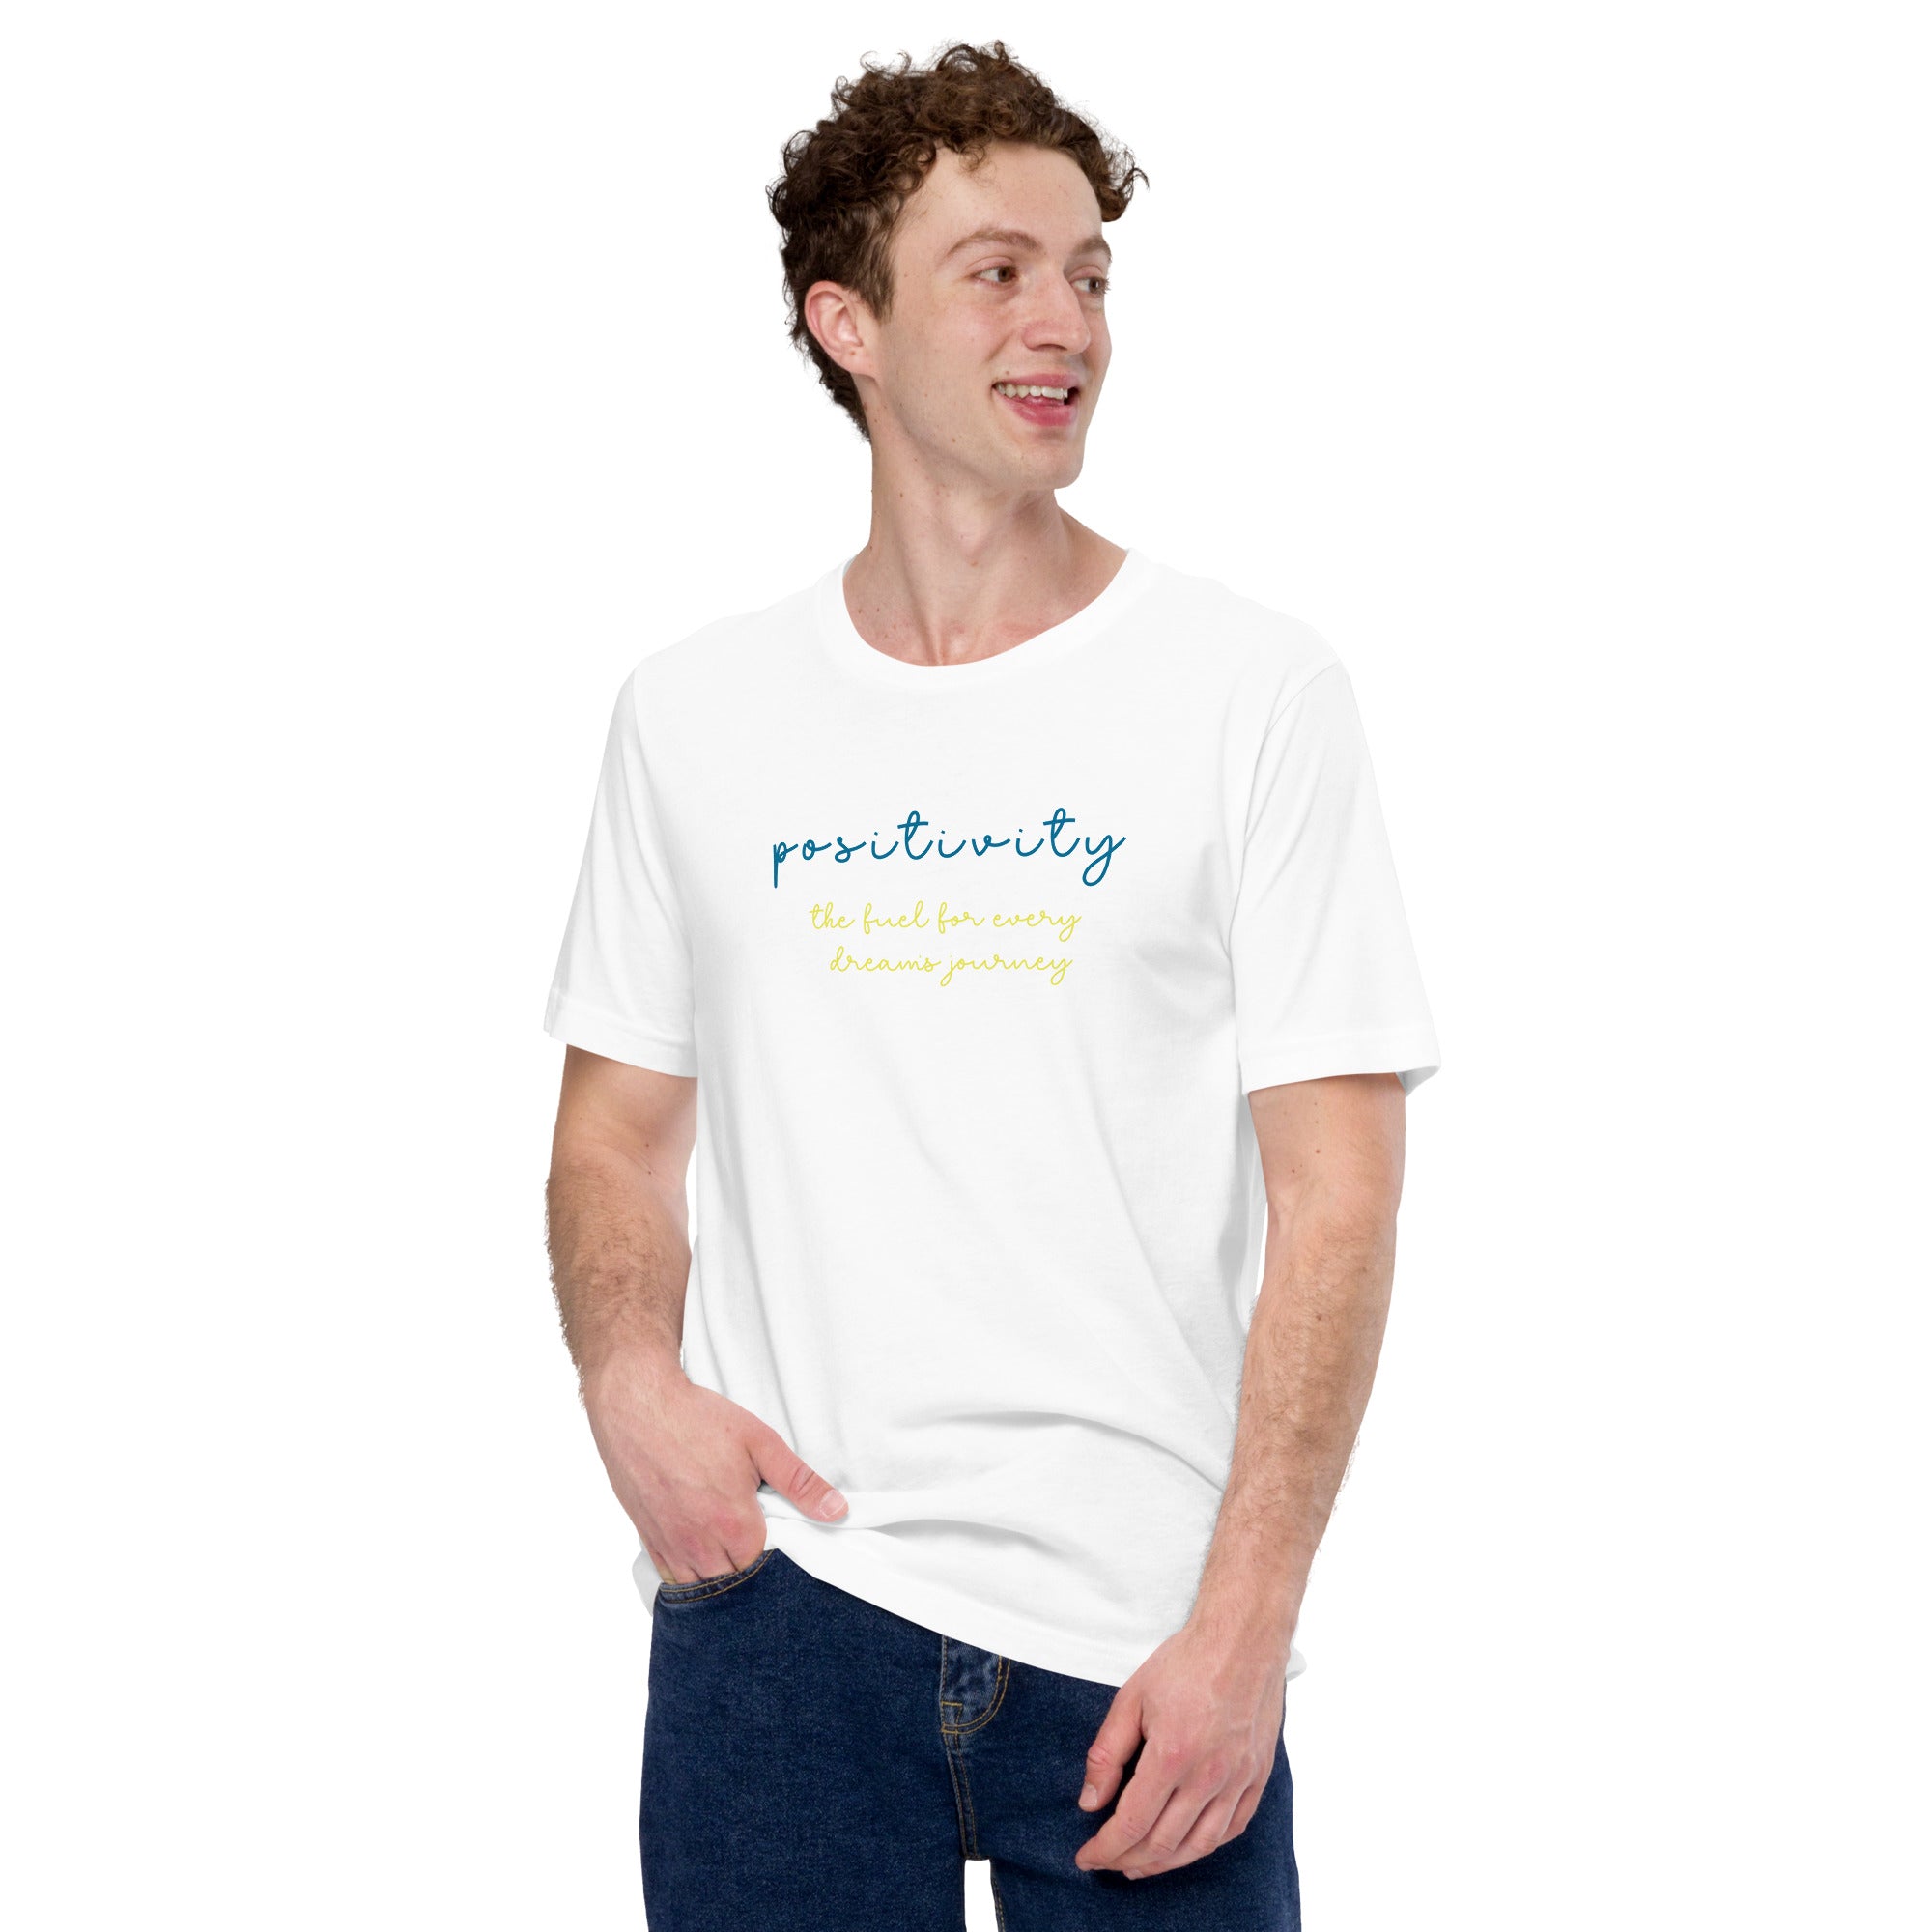 Positivity, The Fuel For Every Dream's Journey, Premium Short-Sleeve Unisex T-Shirt | Positive Affirmation Tee